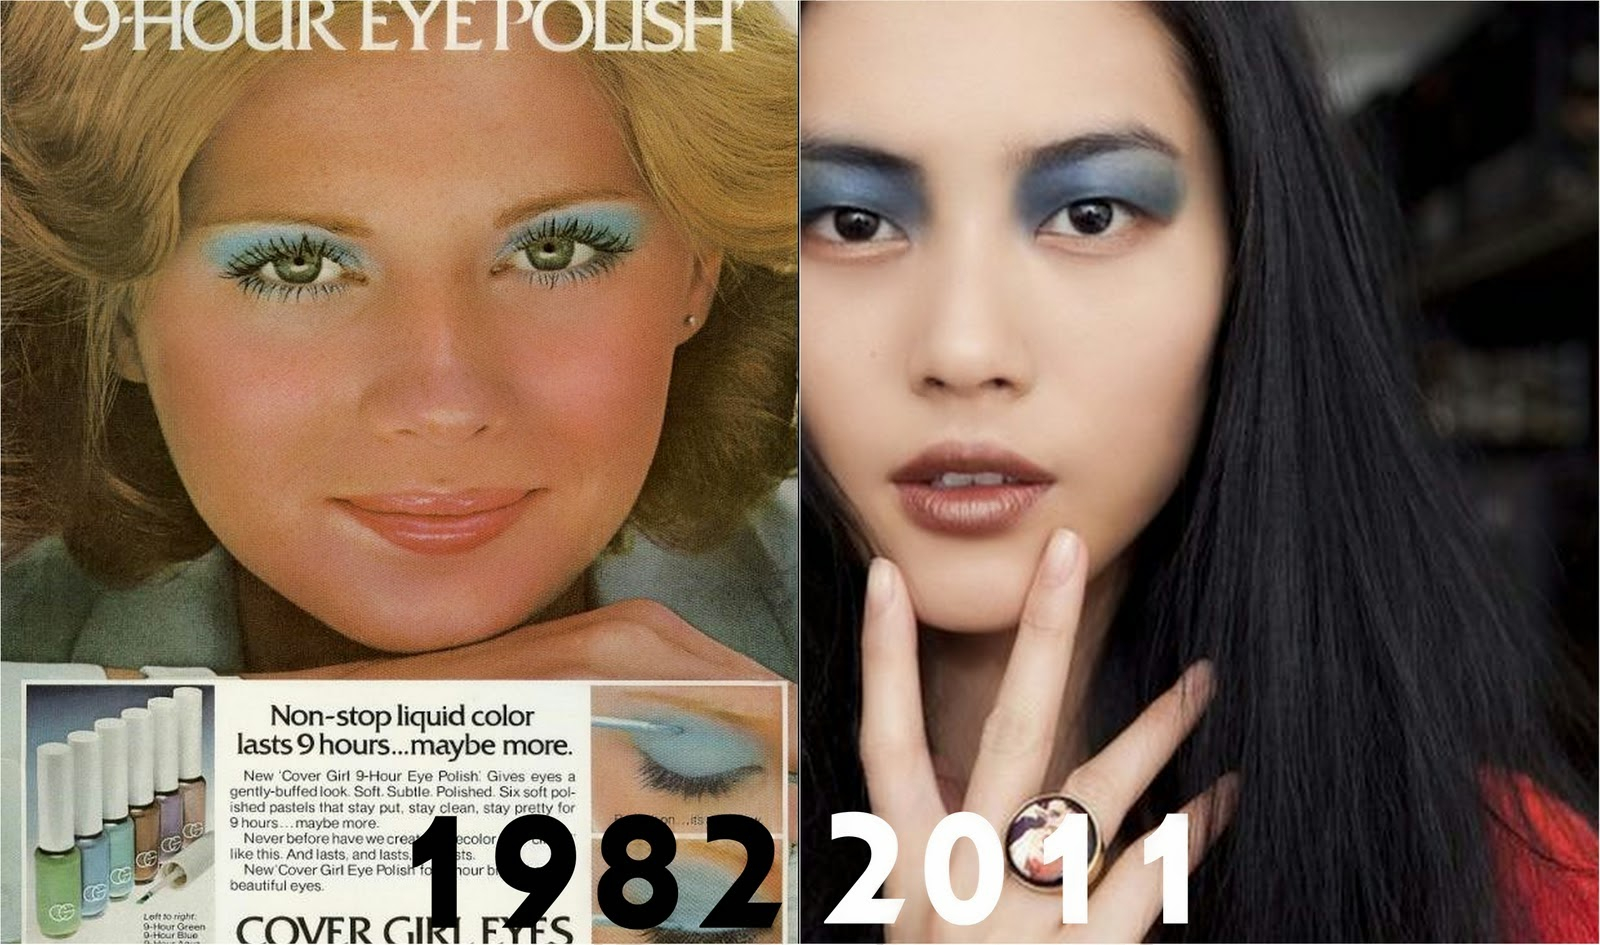 80S Eye Makeup Eyeshadow Placement 20s 80s And Absence Of Browbone Highlight